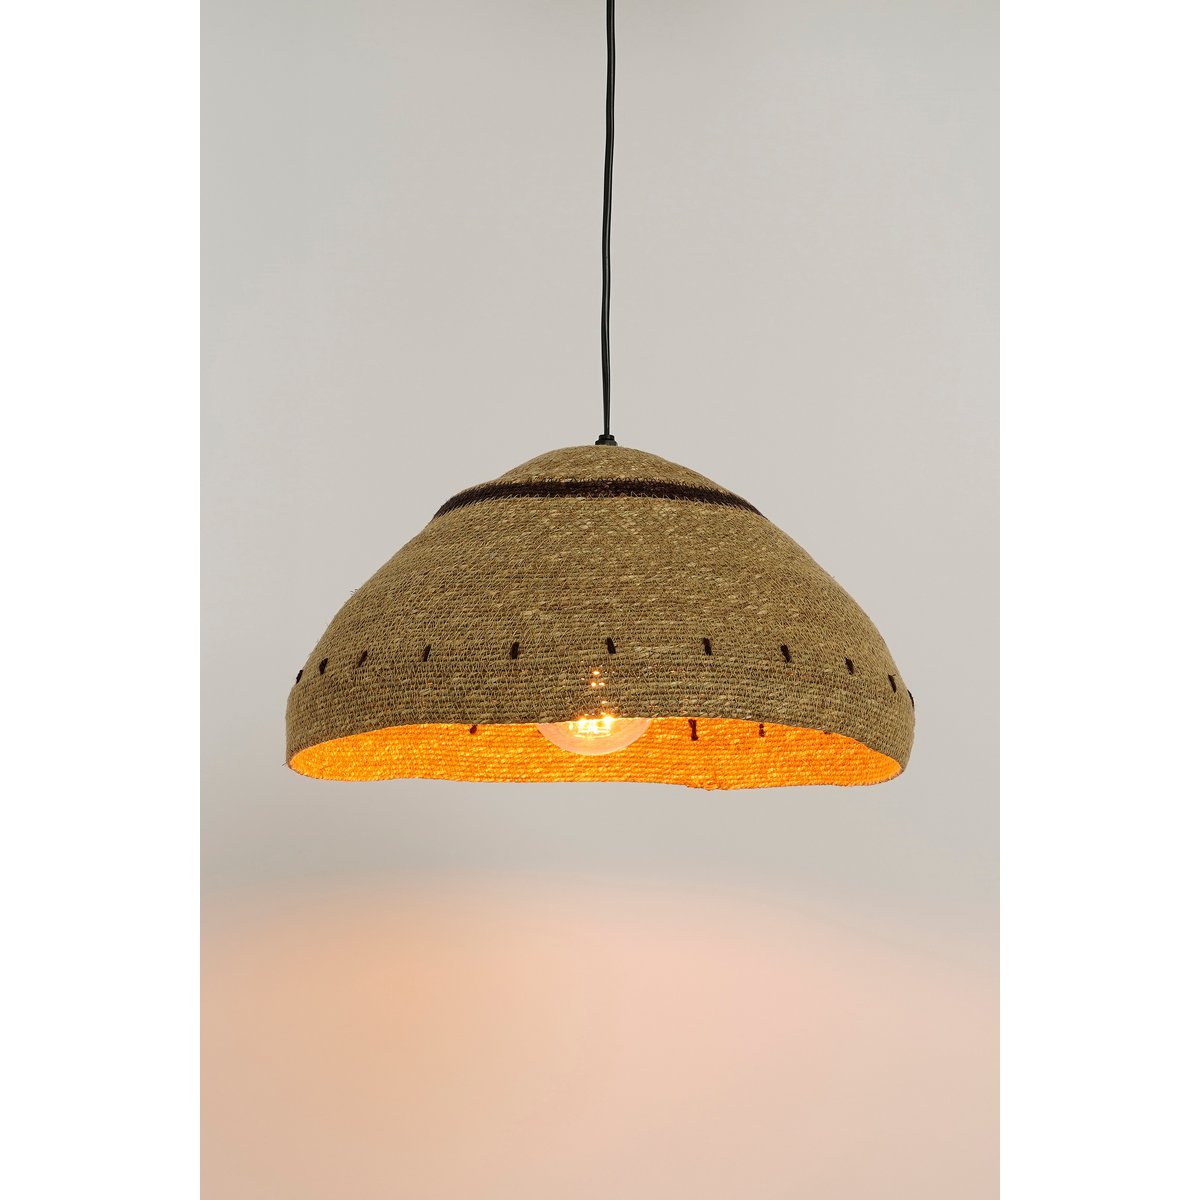 Joulz hanging lamp made of jute, gypsy brown - H22 x Ø41 cm